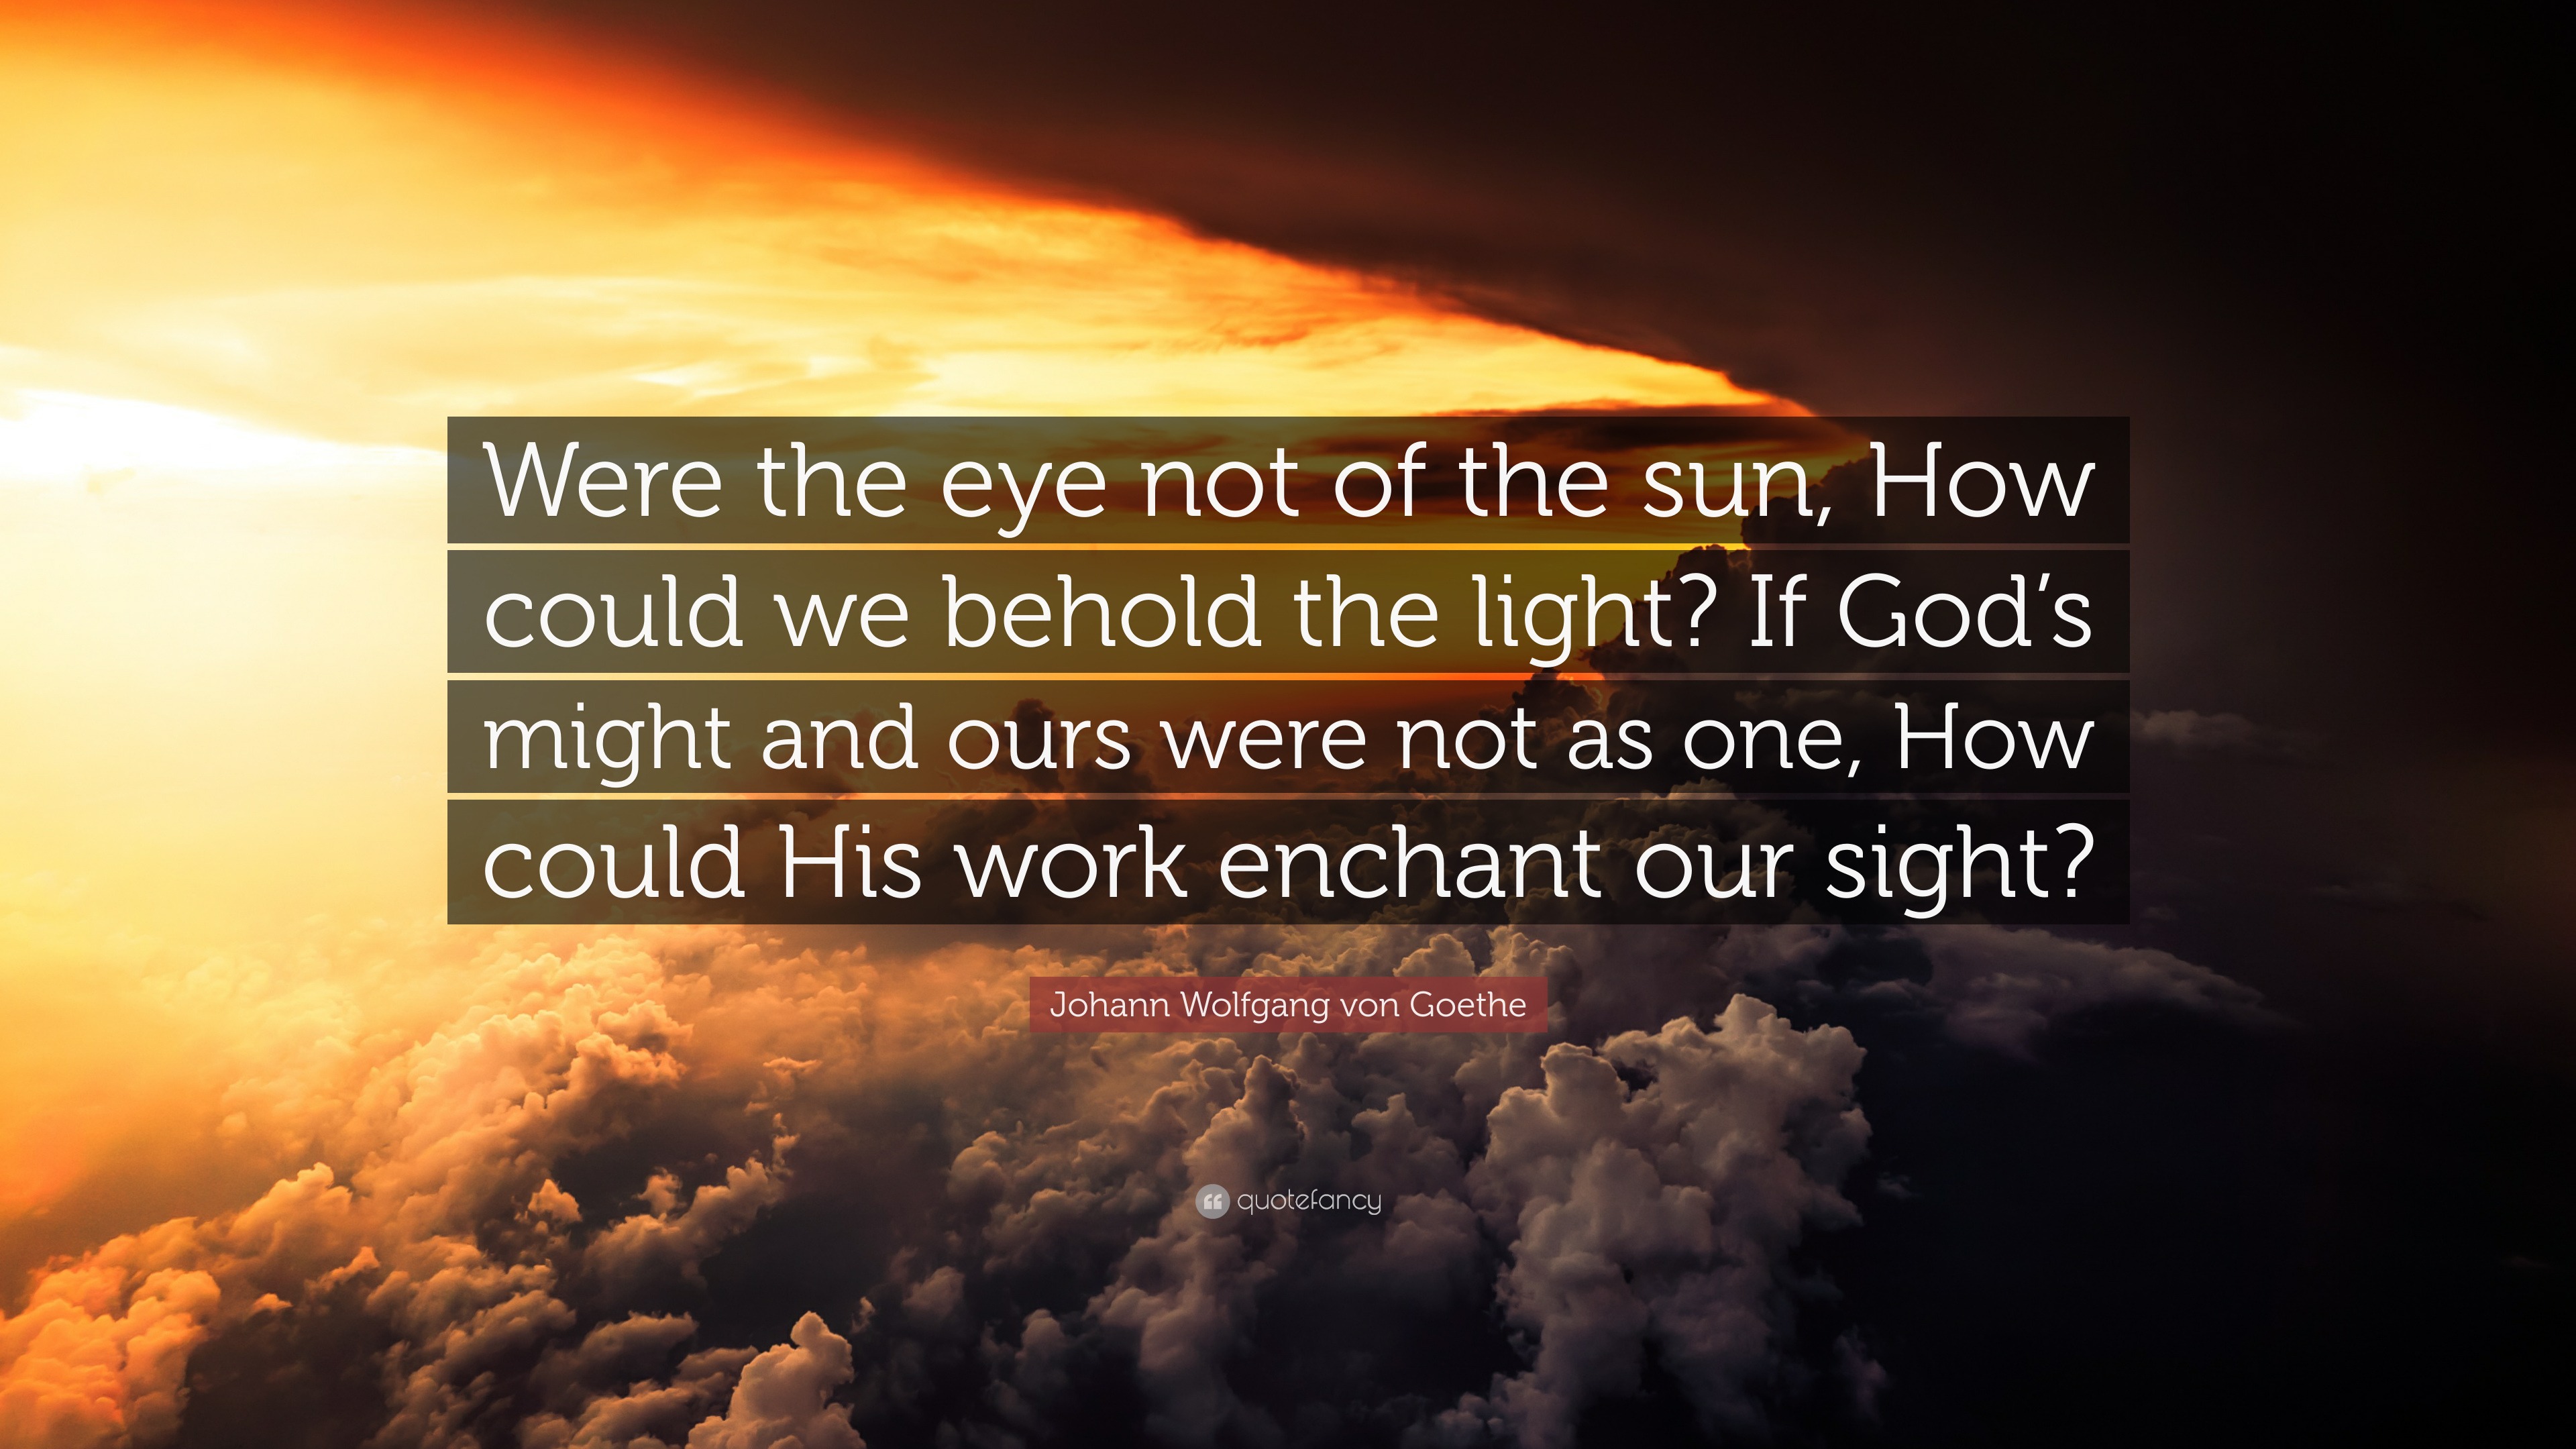 eskalere pakistanske Vær opmærksom på Johann Wolfgang von Goethe Quote: “Were the eye not of the sun, How could  we behold the light? If God's might and ours were not as one, How could His  work ...”